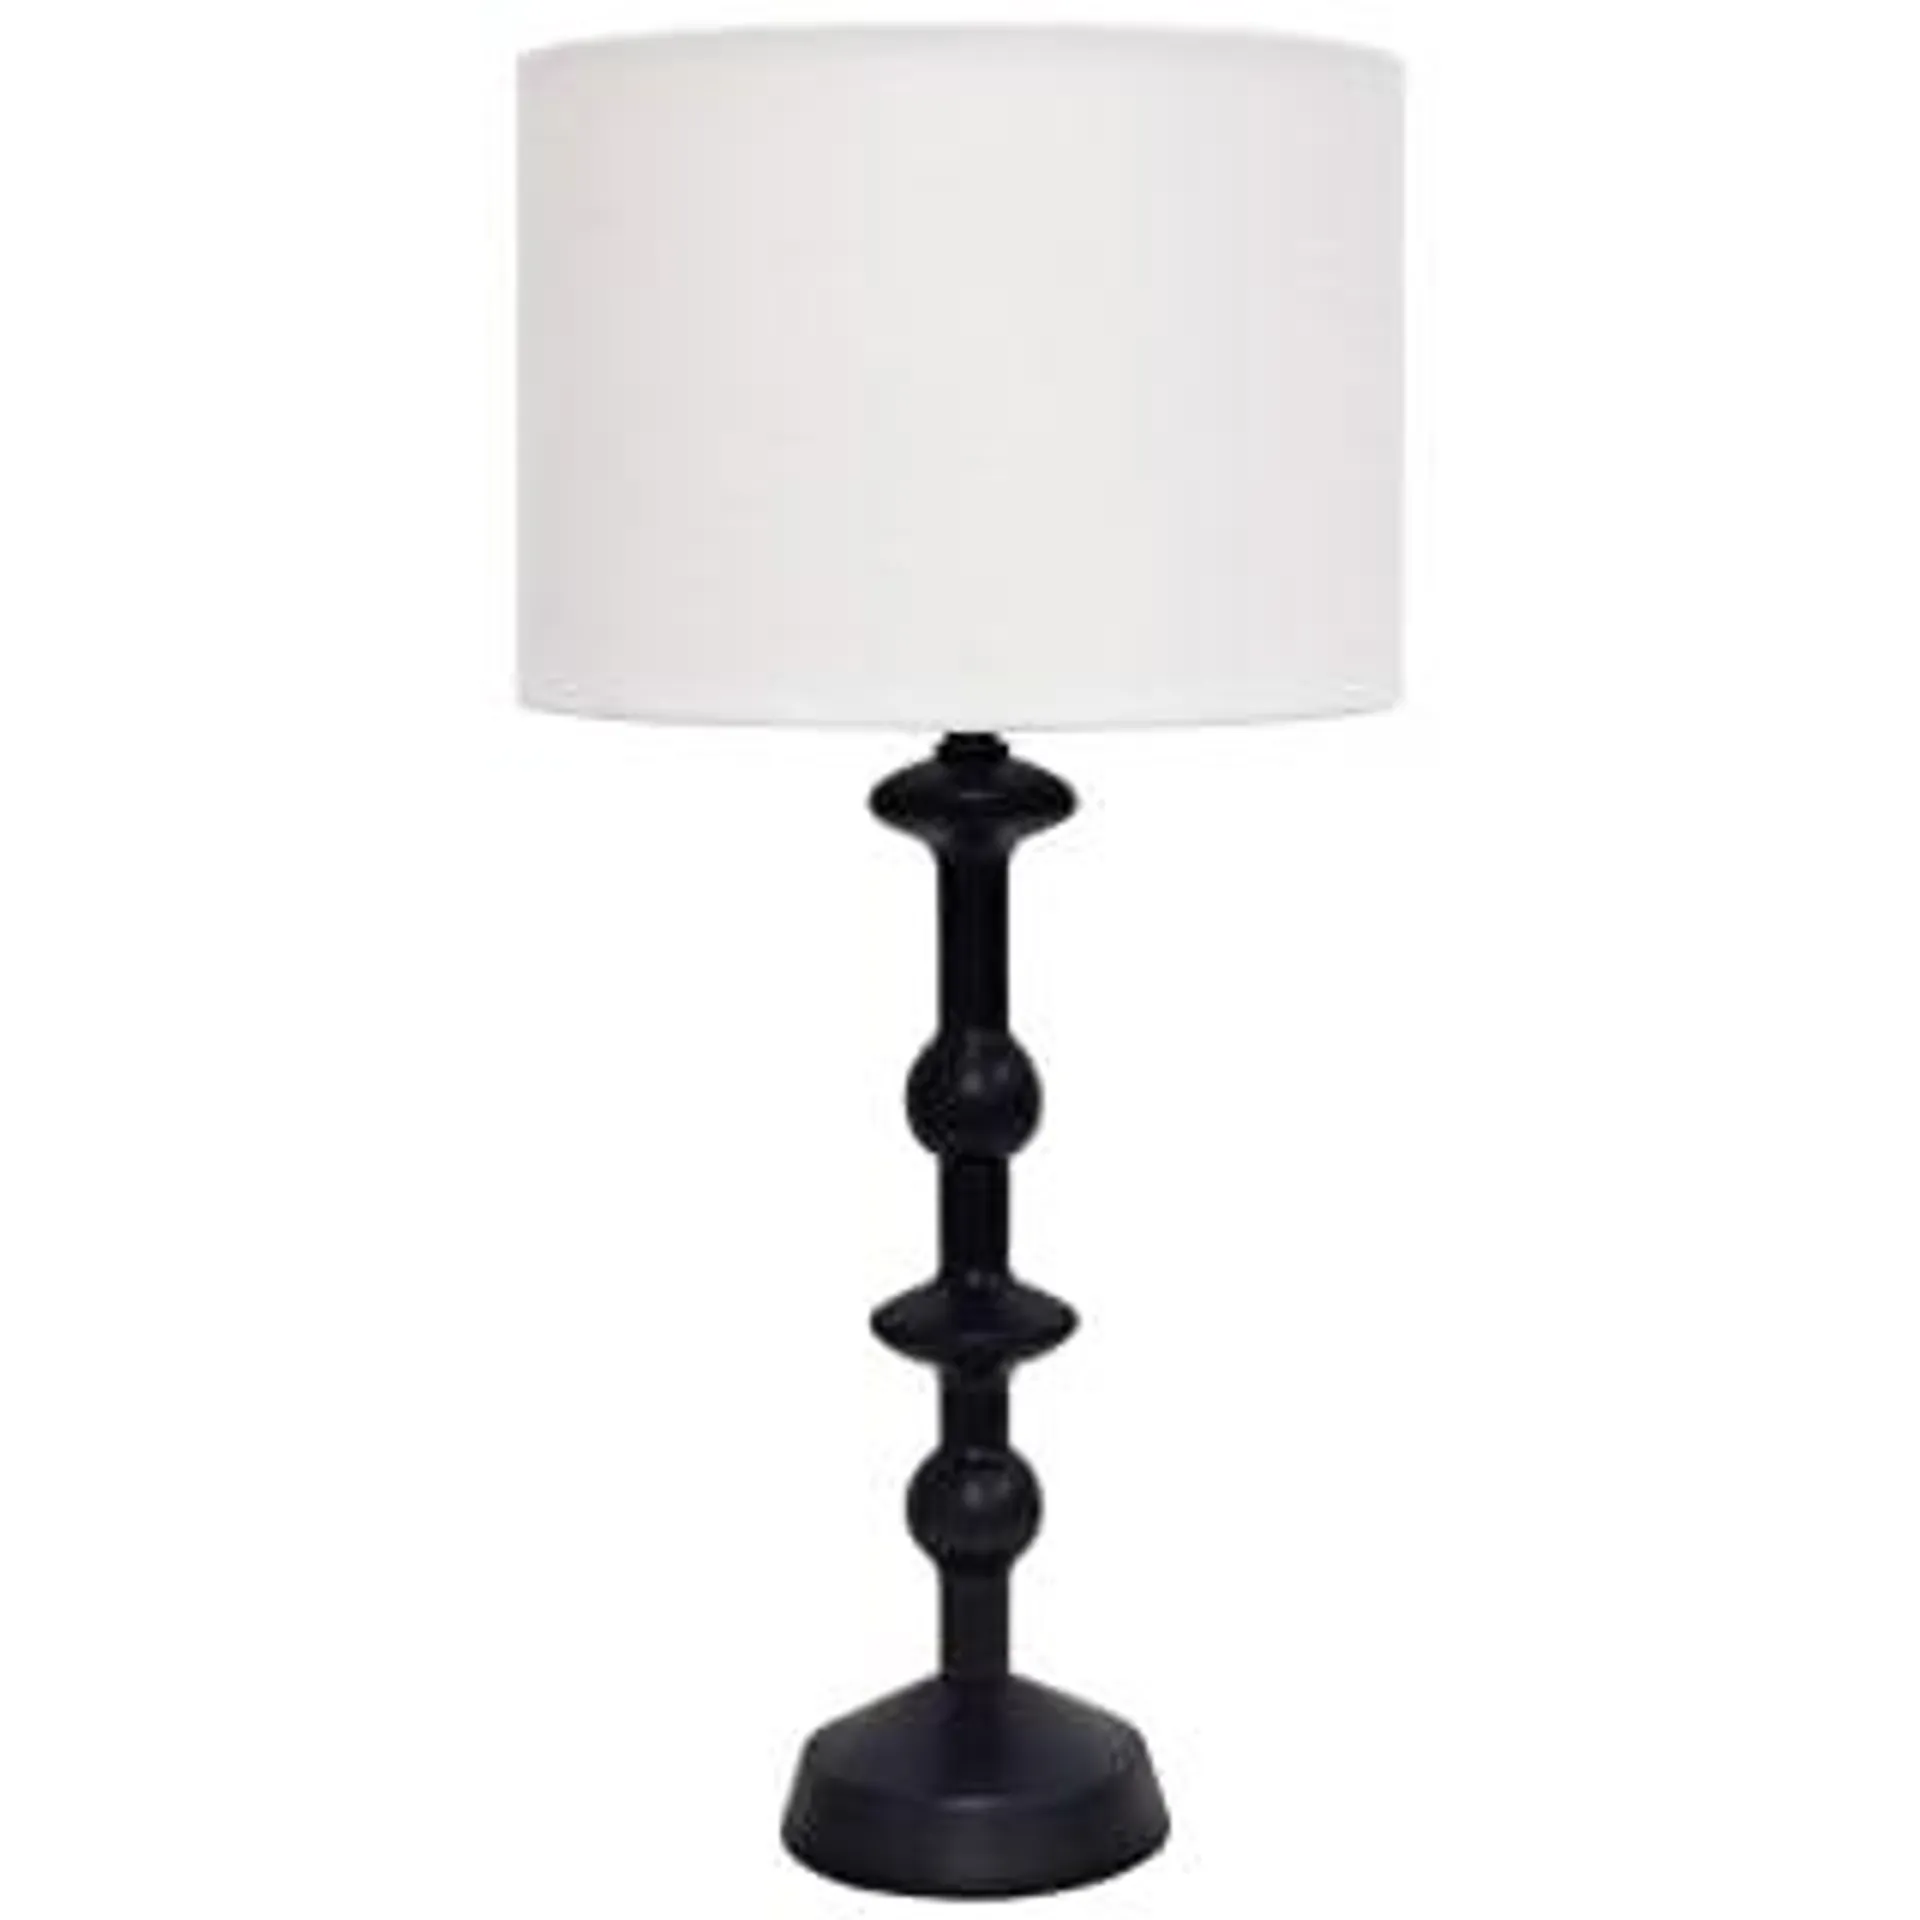 Spindle Table Lamp - Black